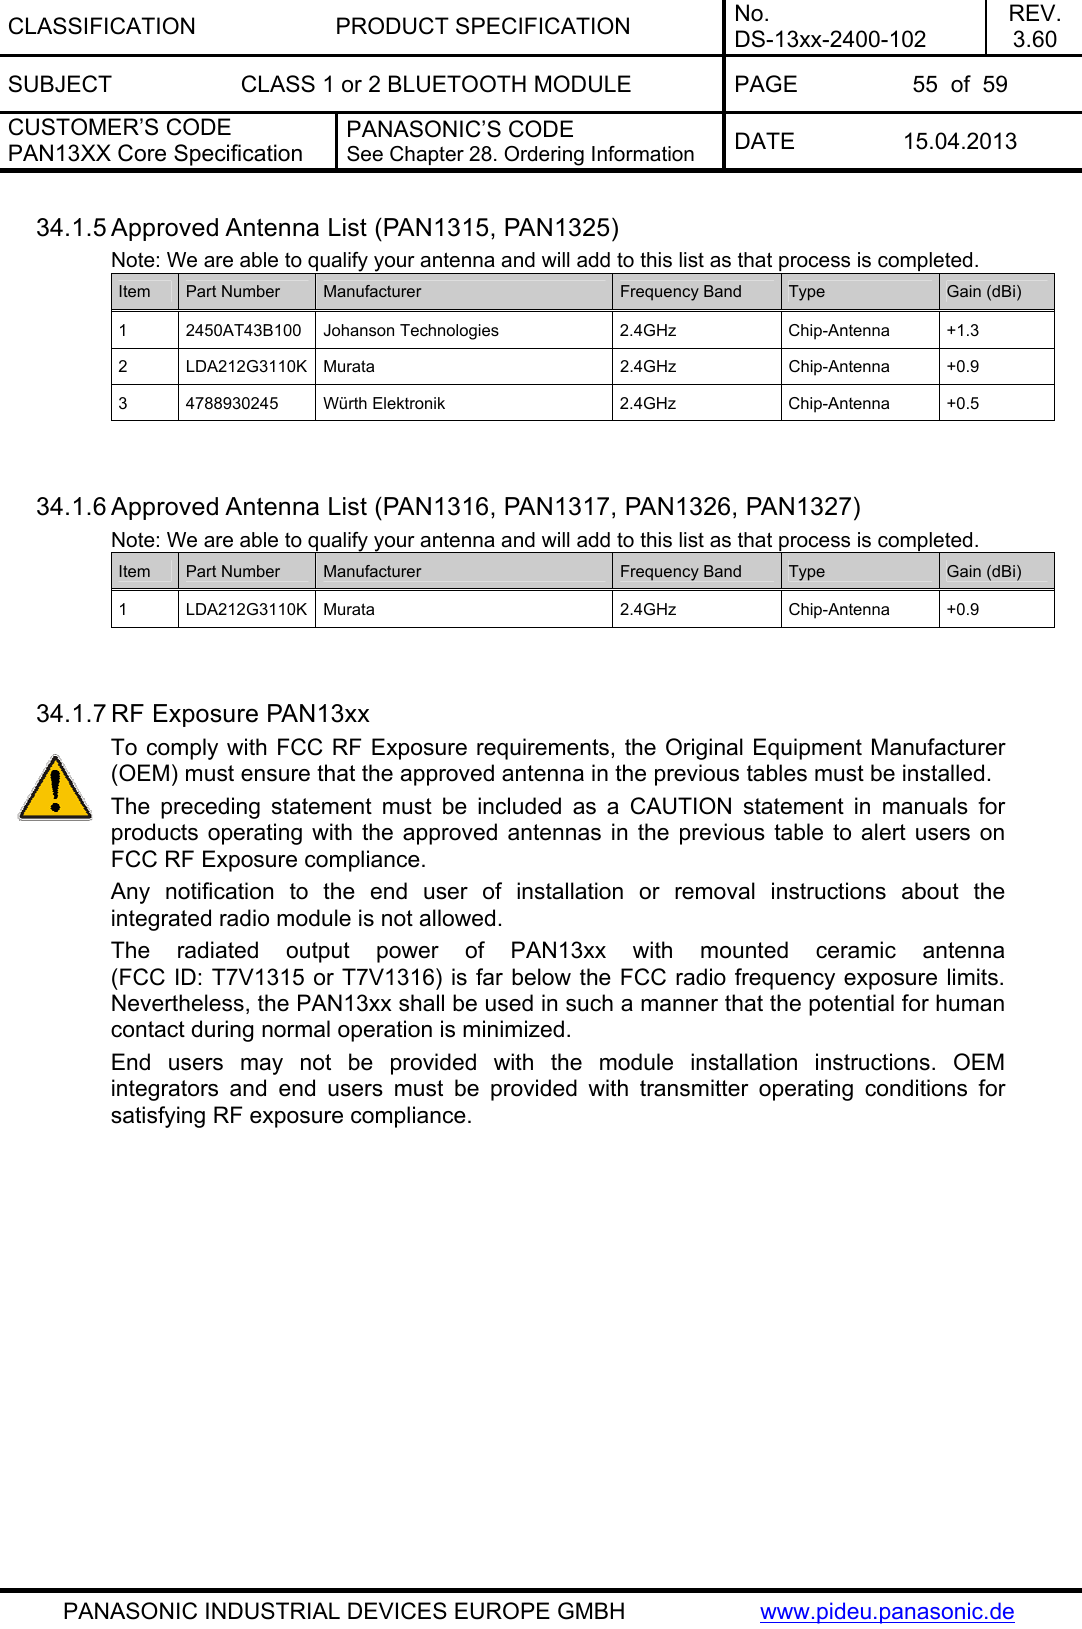 CLASSIFICATION PRODUCT SPECIFICATION No. DS-13xx-2400-102 REV. 3.60 SUBJECT  CLASS 1 or 2 BLUETOOTH MODULE  PAGE  55  of  59 CUSTOMER’S CODE PAN13XX Core Specification PANASONIC’S CODE See Chapter 28. Ordering Information  DATE 15.04.2013   PANASONIC INDUSTRIAL DEVICES EUROPE GMBH  www.pideu.panasonic.de 34.1.5 Approved Antenna List (PAN1315, PAN1325) Note: We are able to qualify your antenna and will add to this list as that process is completed. Item  Part Number  Manufacturer  Frequency Band  Type  Gain (dBi) 1 2450AT43B100 Johanson Technologies 2.4GHz Chip-Antenna +1.3 2 LDA212G3110K Murata  2.4GHz  Chip-Antenna +0.9 3 4788930245 Würth Elektronik  2.4GHz  Chip-Antenna +0.5   34.1.6 Approved Antenna List (PAN1316, PAN1317, PAN1326, PAN1327) Note: We are able to qualify your antenna and will add to this list as that process is completed. Item  Part Number  Manufacturer  Frequency Band  Type  Gain (dBi) 1 LDA212G3110K Murata  2.4GHz  Chip-Antenna +0.9   34.1.7 RF Exposure PAN13xx To comply with FCC RF Exposure requirements, the Original Equipment Manufacturer (OEM) must ensure that the approved antenna in the previous tables must be installed. The preceding statement must be included as a CAUTION statement in manuals for products operating with the approved antennas in the previous table to alert users on FCC RF Exposure compliance. Any notification to the end user of installation or removal instructions about the integrated radio module is not allowed. The radiated output power of PAN13xx with mounted ceramic antenna (FCC ID: T7V1315 or T7V1316) is far below the FCC radio frequency exposure limits. Nevertheless, the PAN13xx shall be used in such a manner that the potential for human contact during normal operation is minimized. End users may not be provided with the module installation instructions. OEM integrators and end users must be provided with transmitter operating conditions for satisfying RF exposure compliance.    